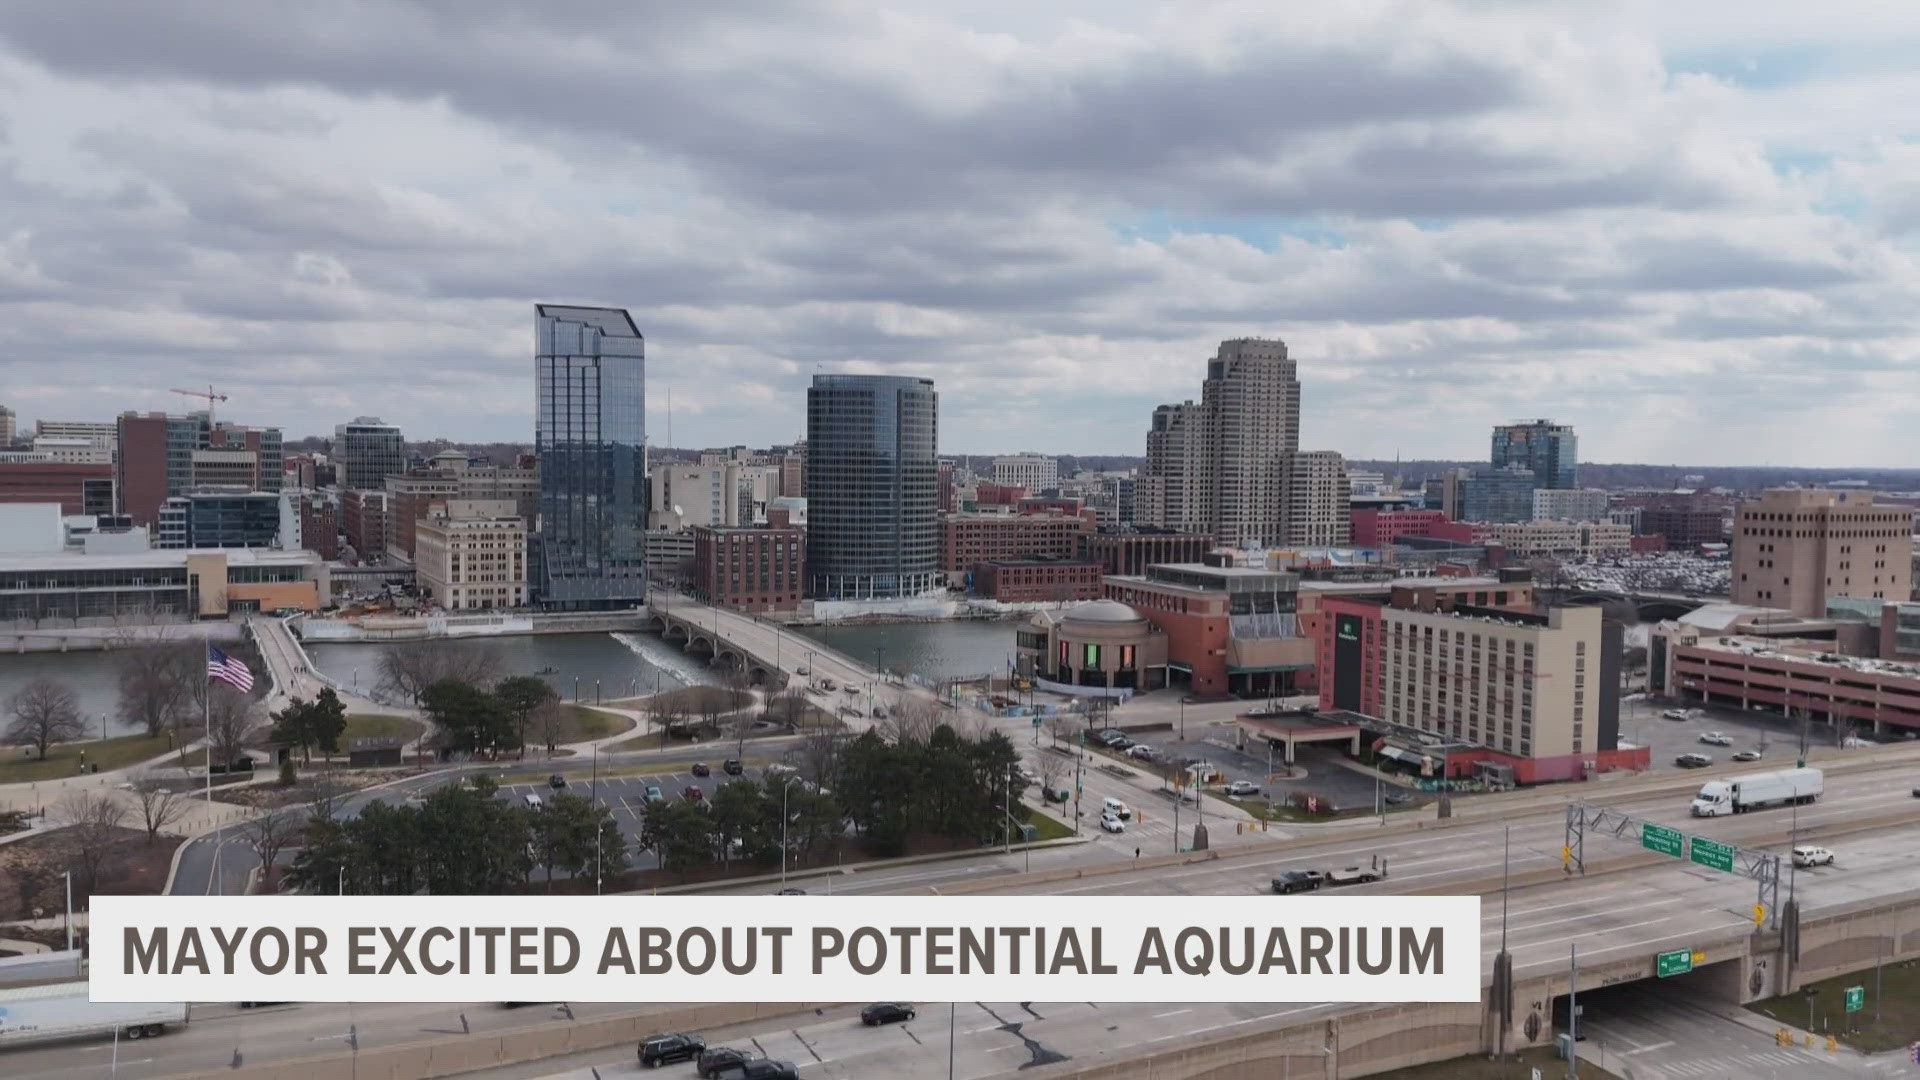 City leaders say the aquarium would be funded by increased hotel taxes in Kent County. It is unclear where the aquarium would be built and how much it would cost.